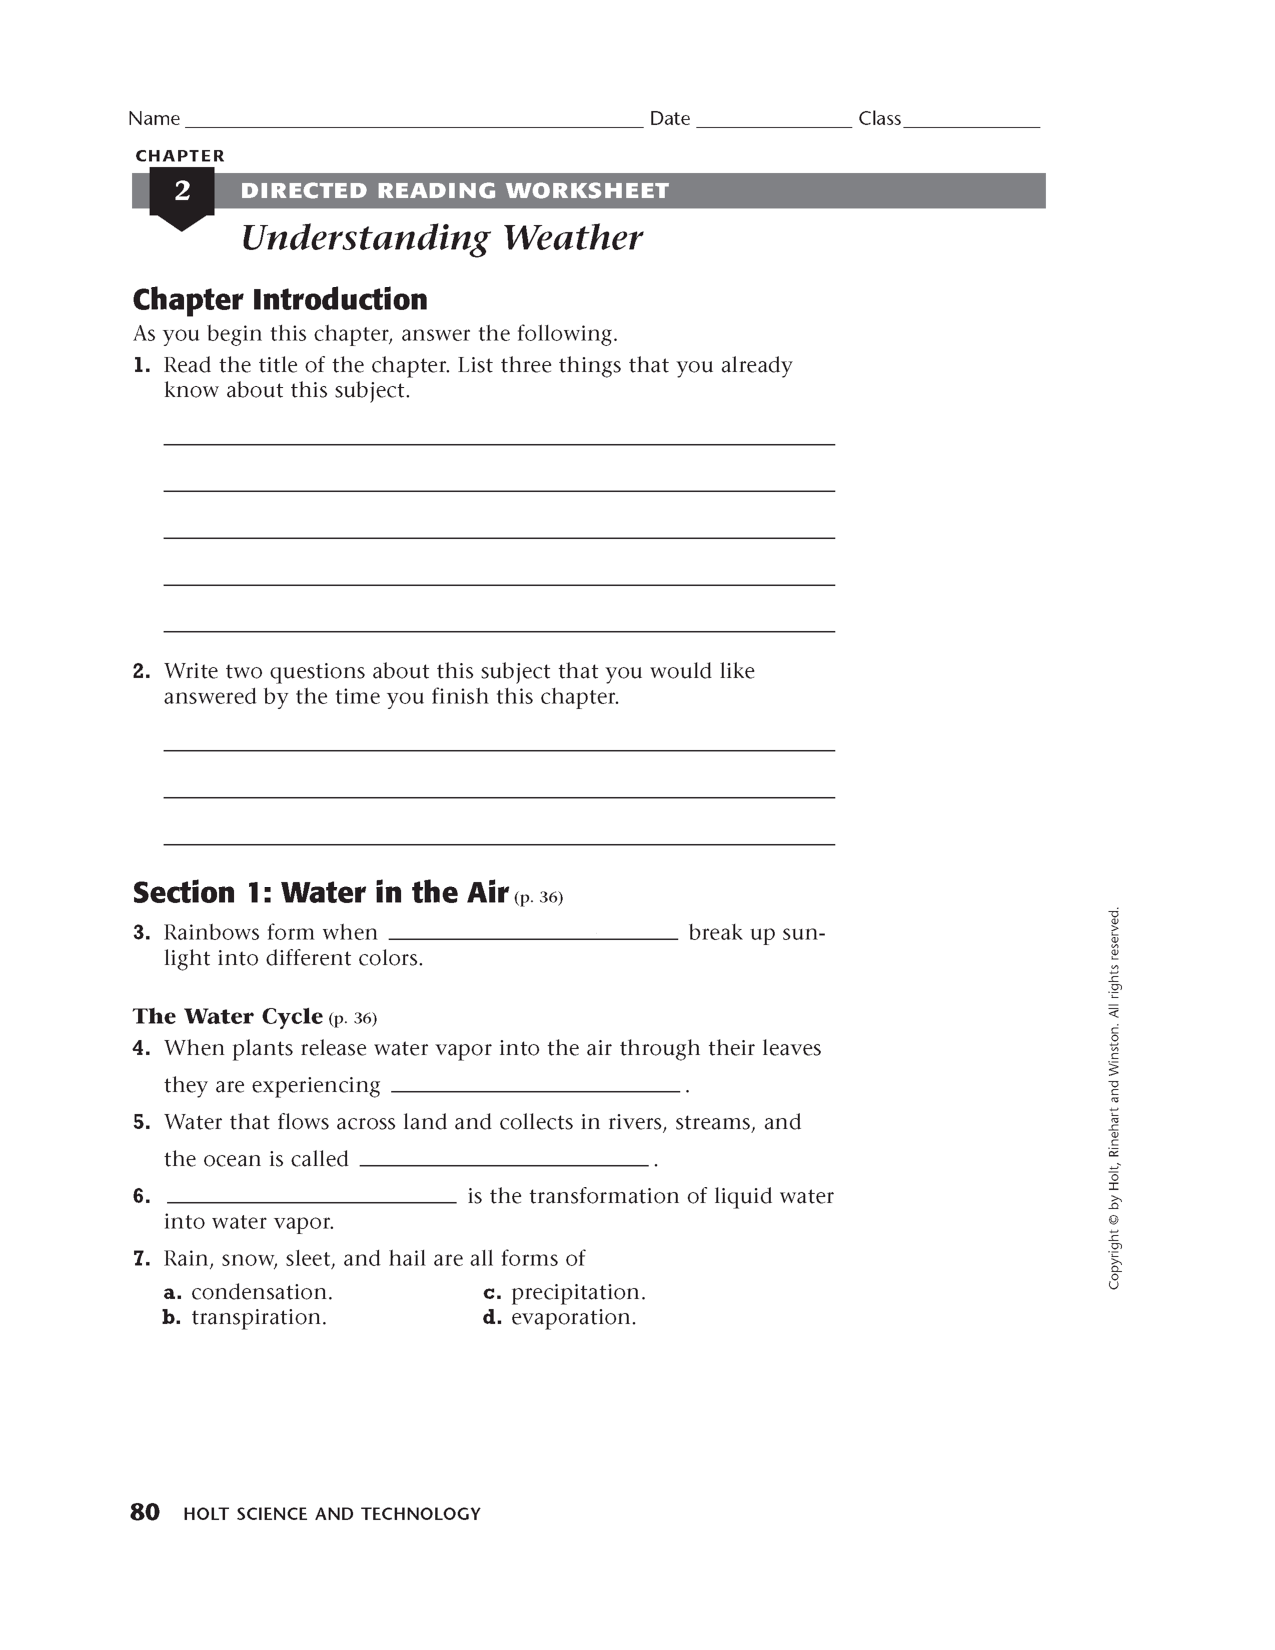 Holt Science And Technology Worksheet Answers 5881